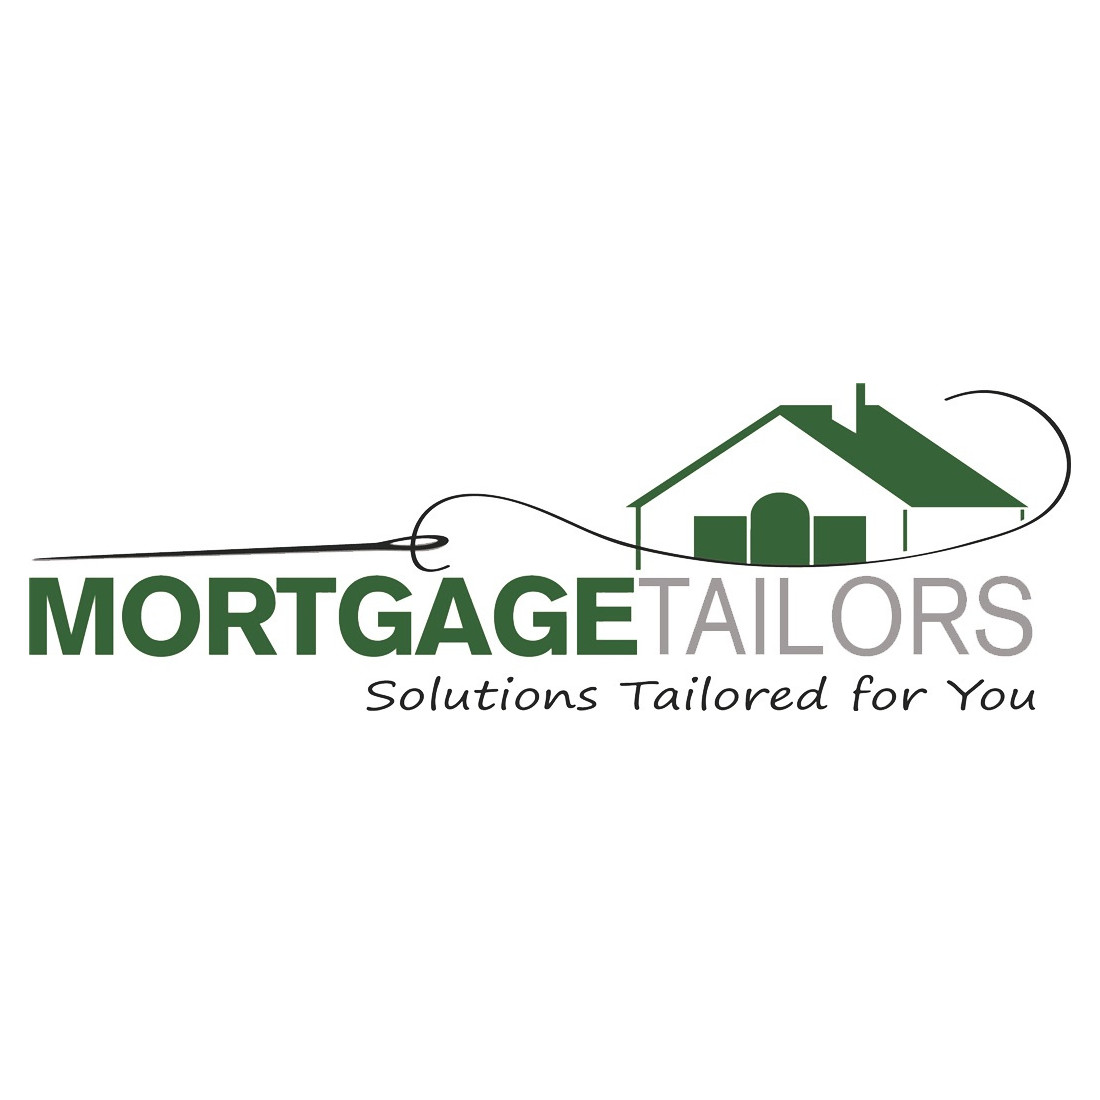 Mortgage Tailors